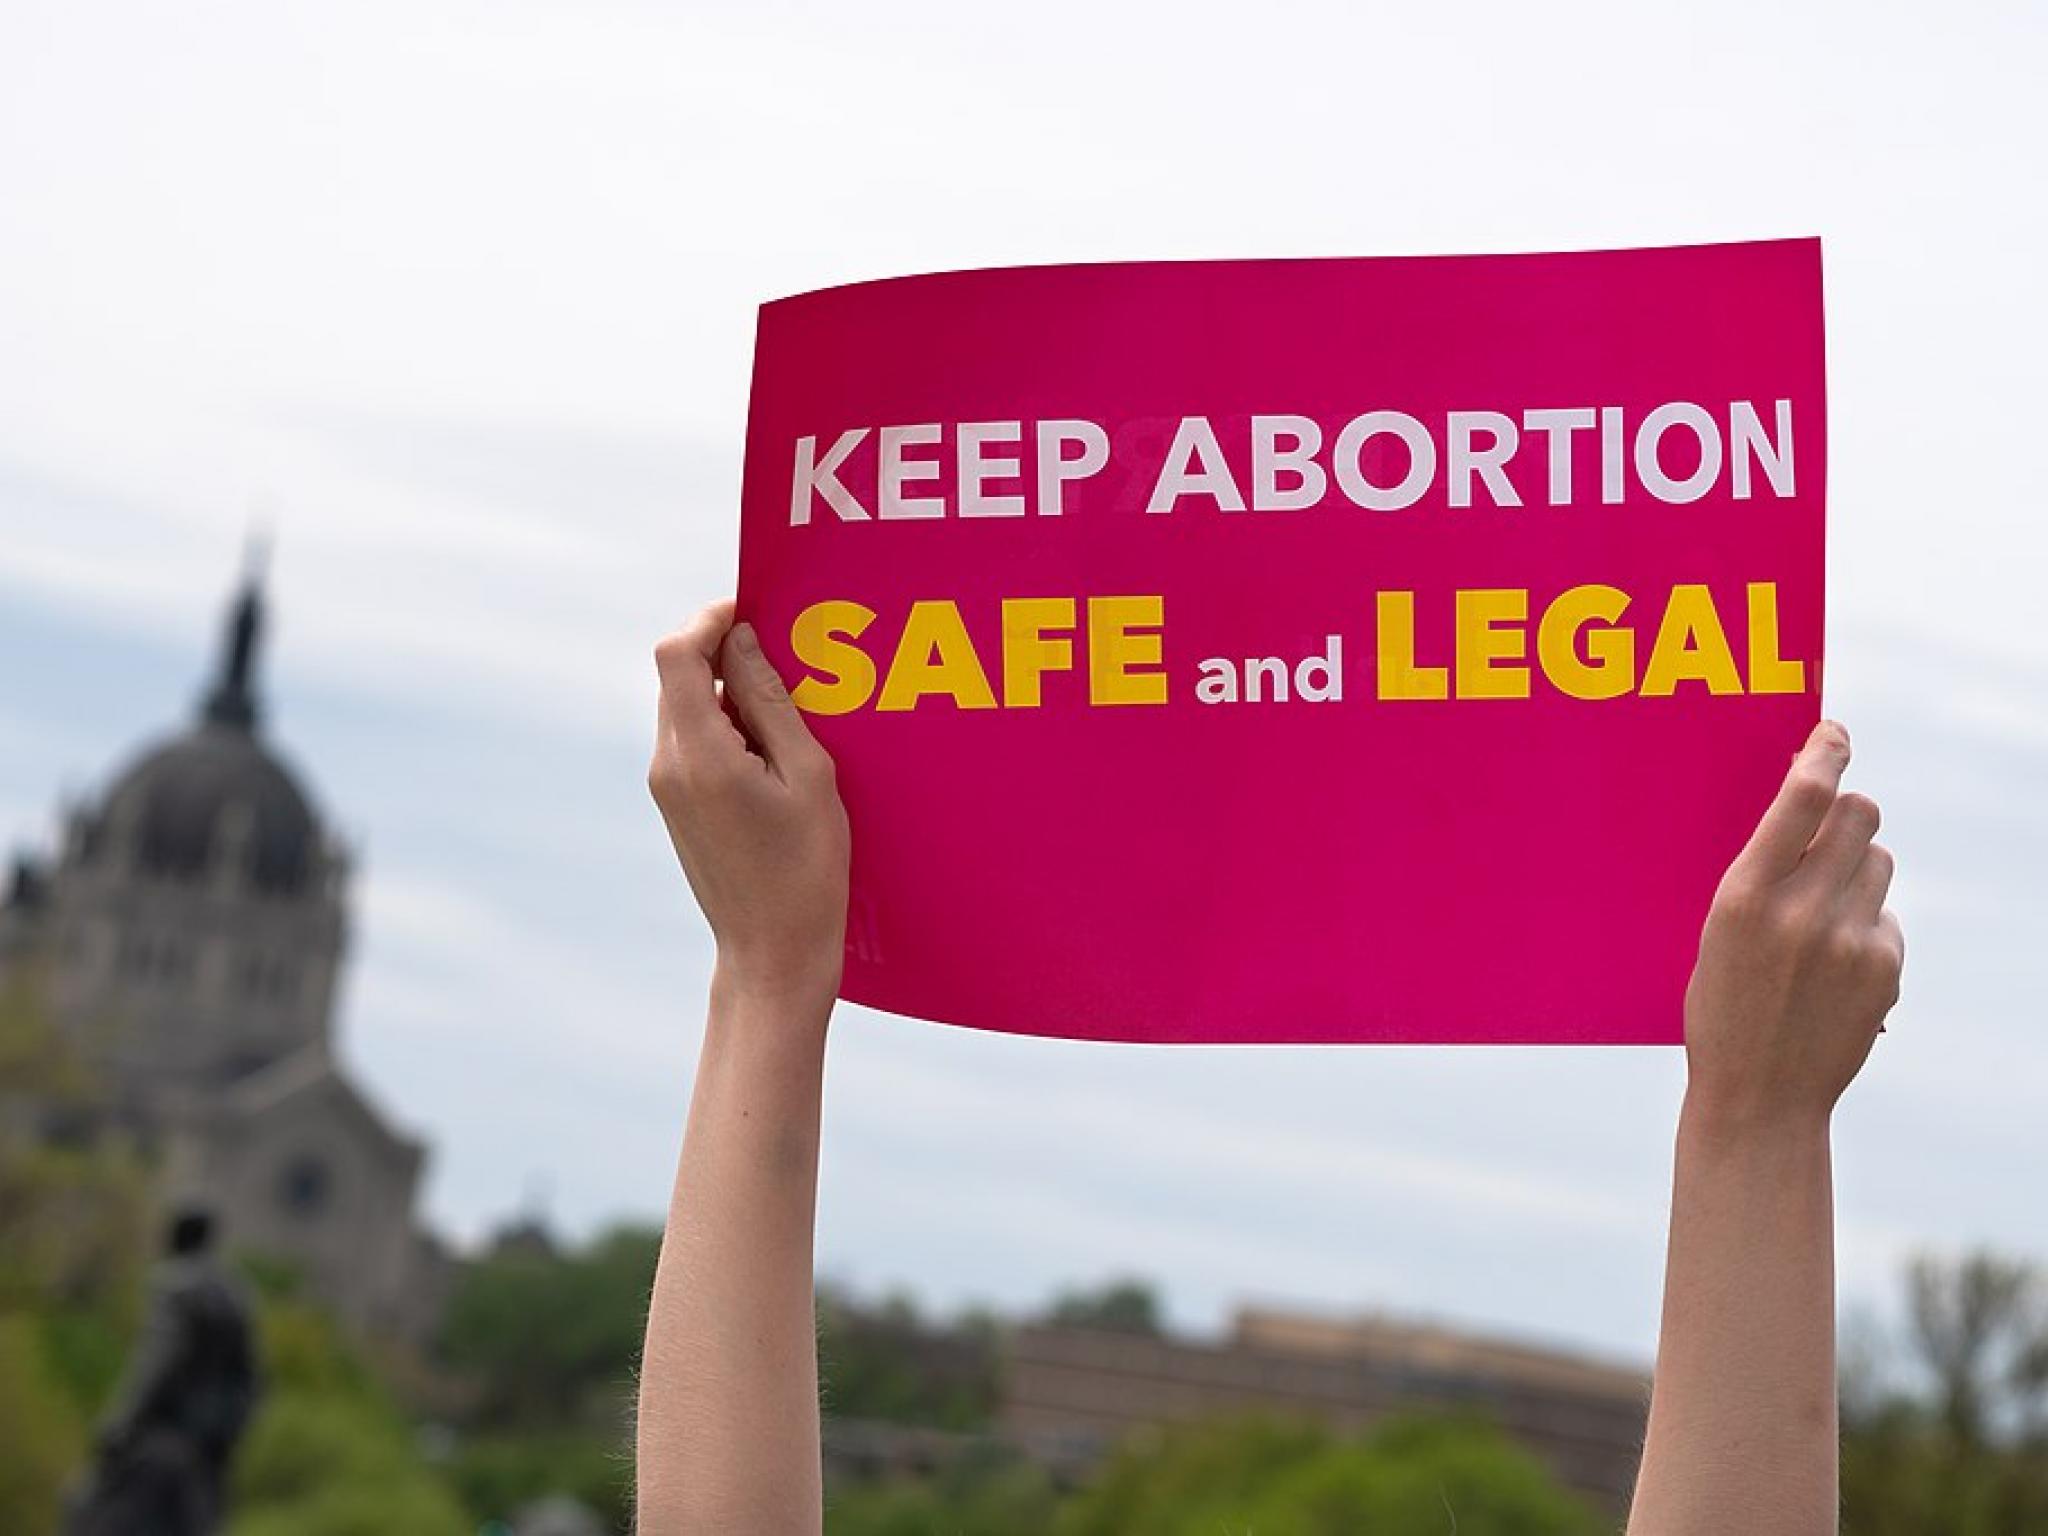  womens-reproductive-rights-us-court-preserves-access-to-abortion-pill-for-now-but-with-tighter-rules 